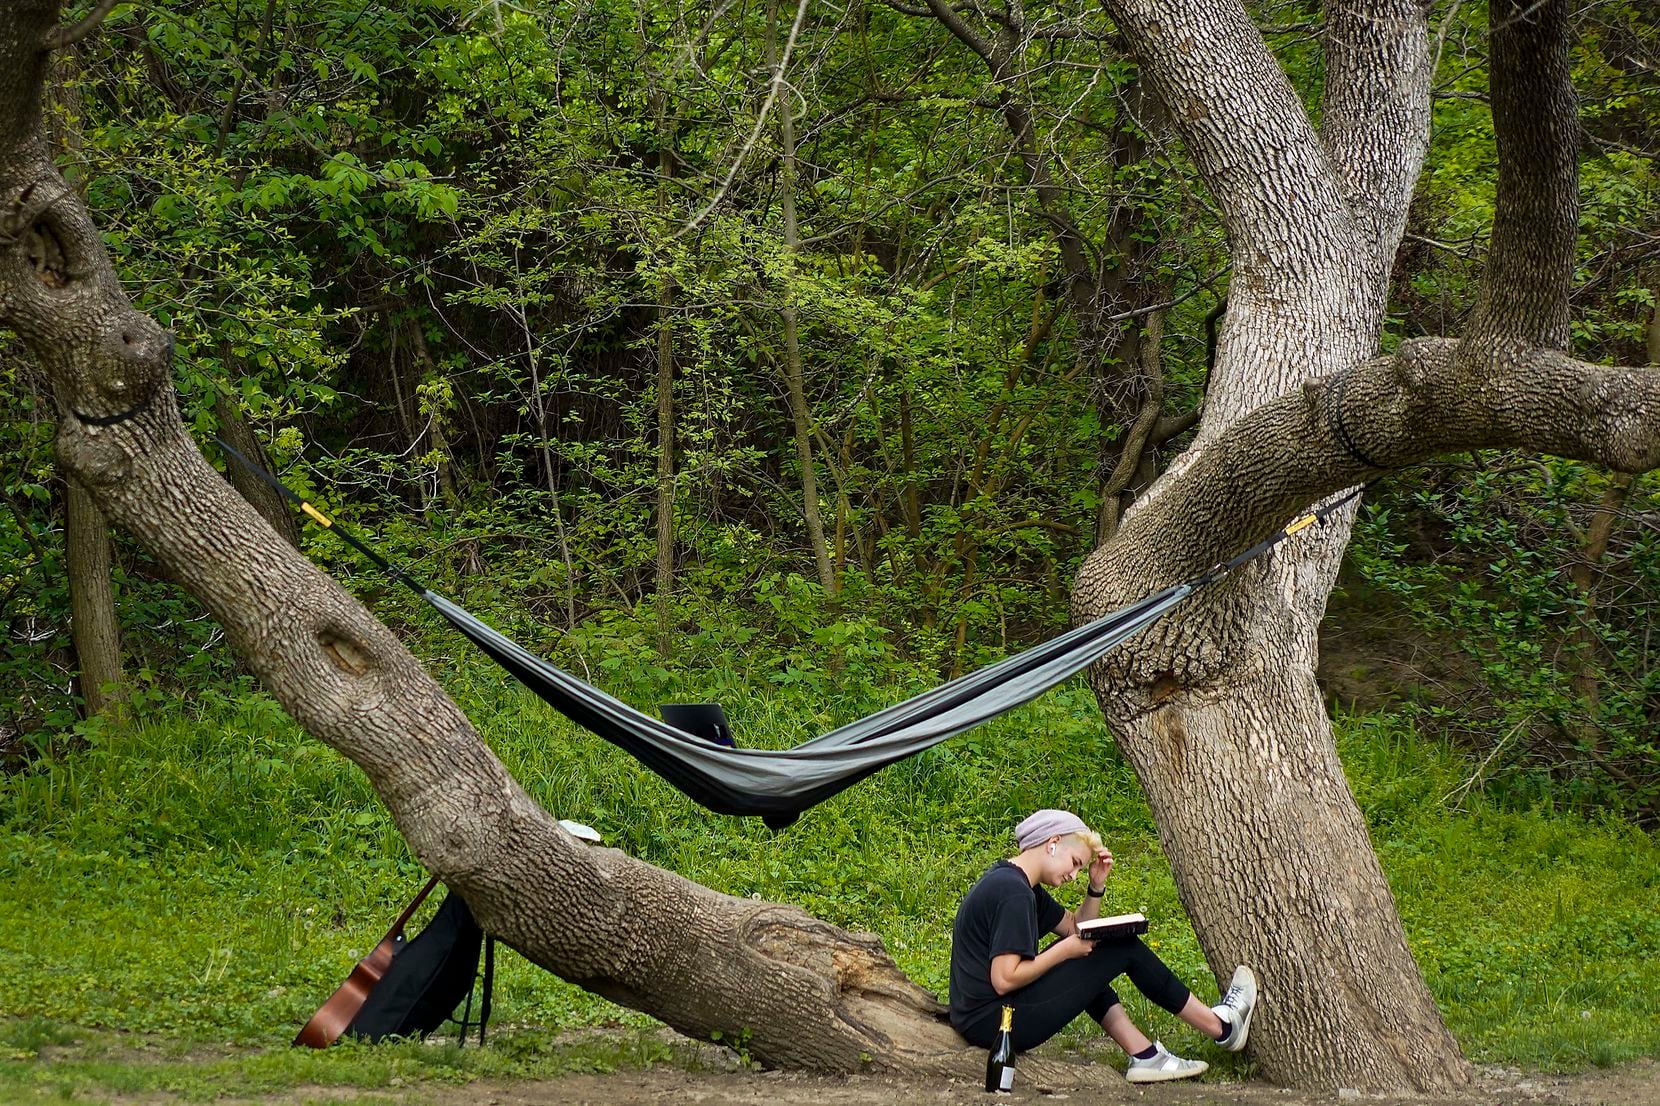 With a book, a hammock, a musical instrument and a beverage, a woman enjoys time outdoors in...